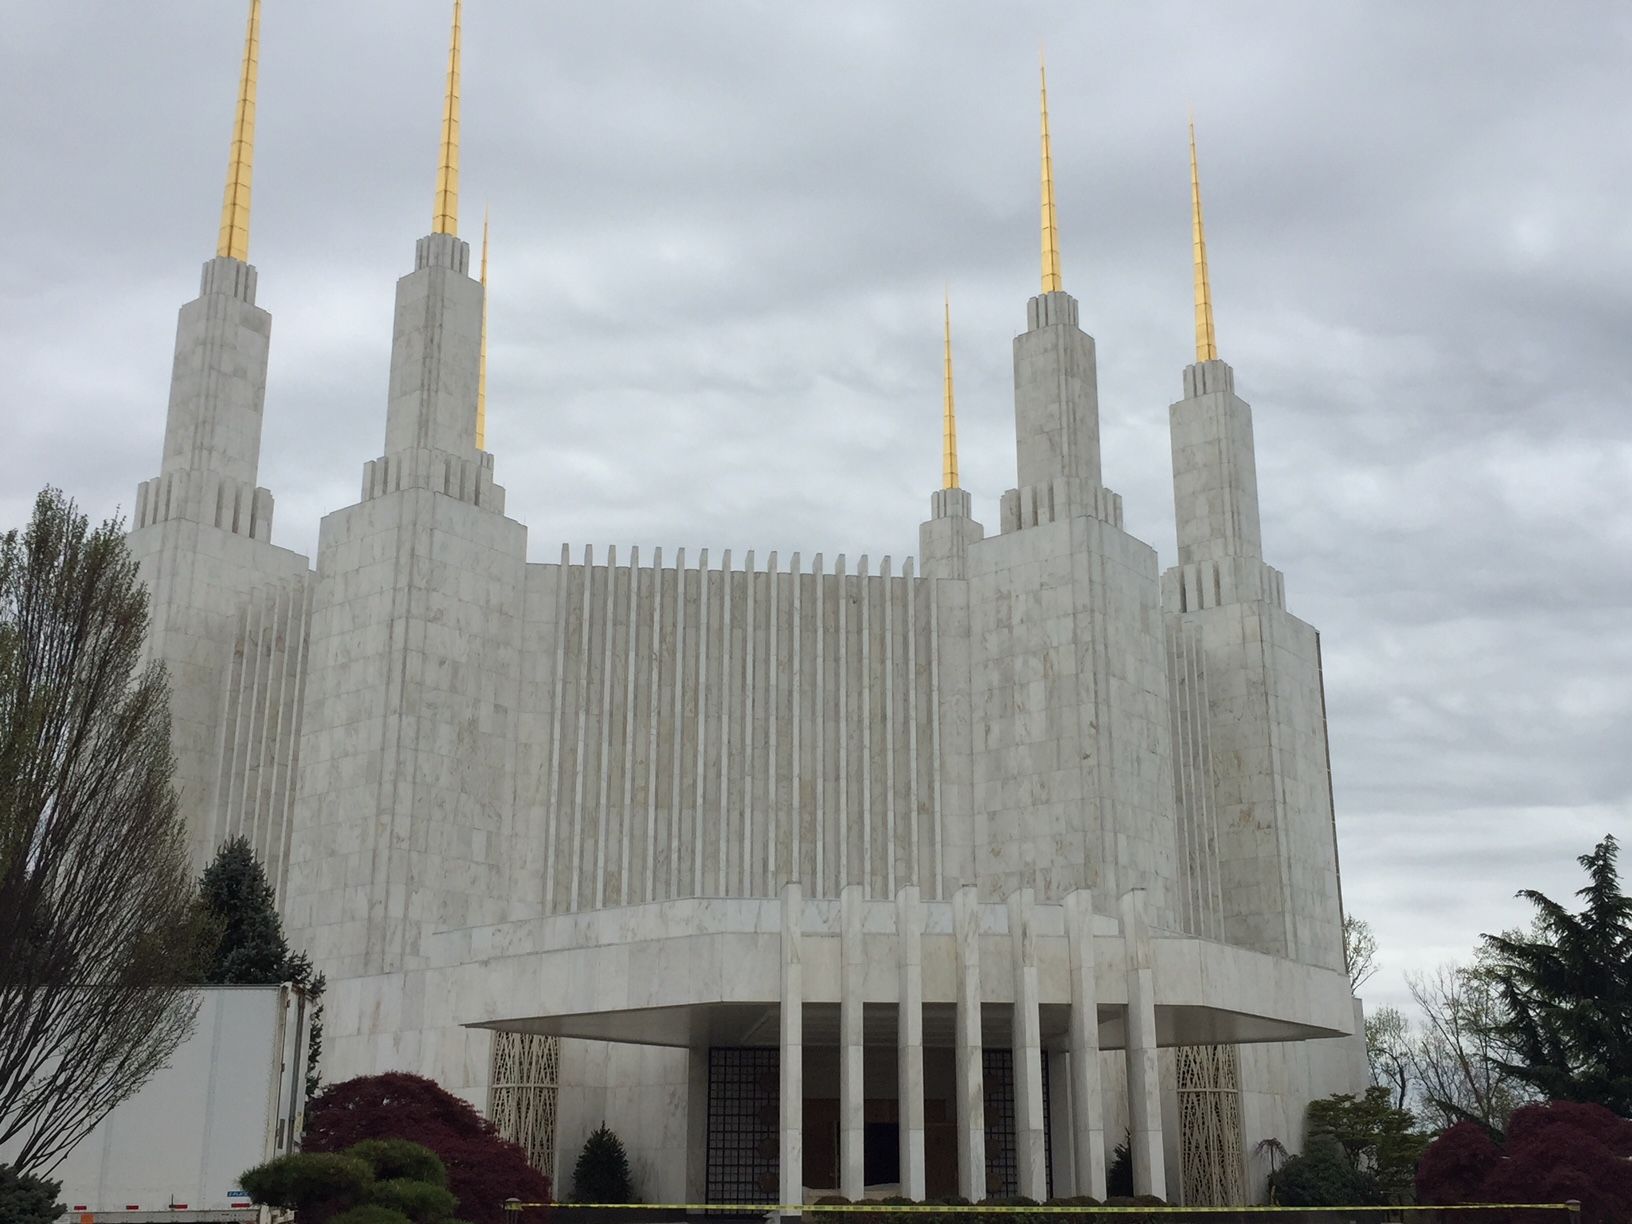 The Mormon Temple in Kensington, Maryland, looms over the Beltway. It sits on a hill, making it look even taller. (WTOP/John Domen)